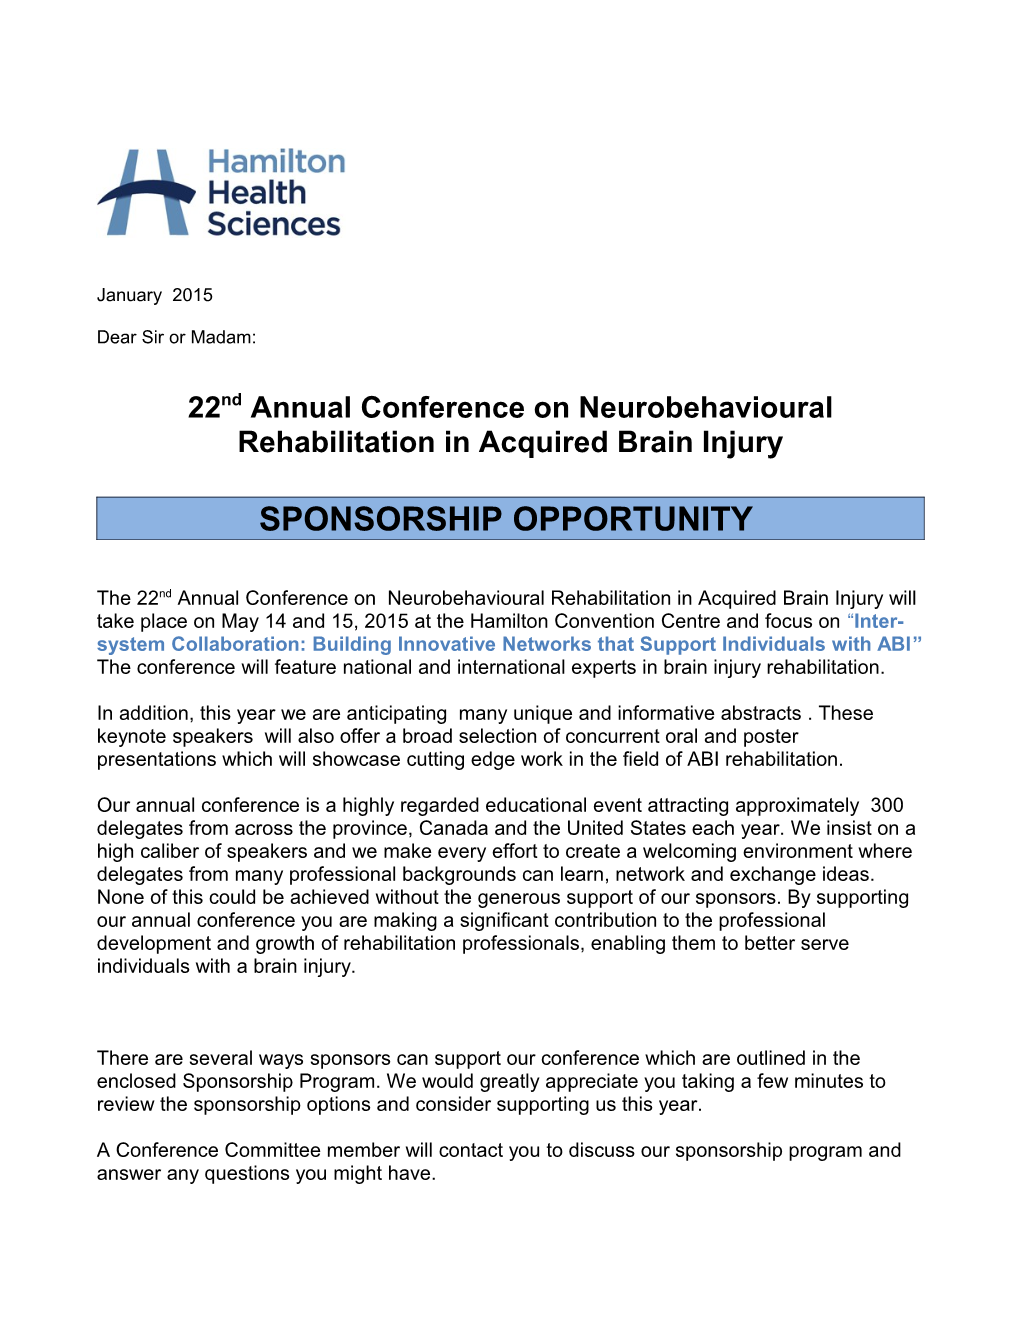 22Nd Annual Conference on Neurobehavioural Rehabilitation in Acquired Brain Injury